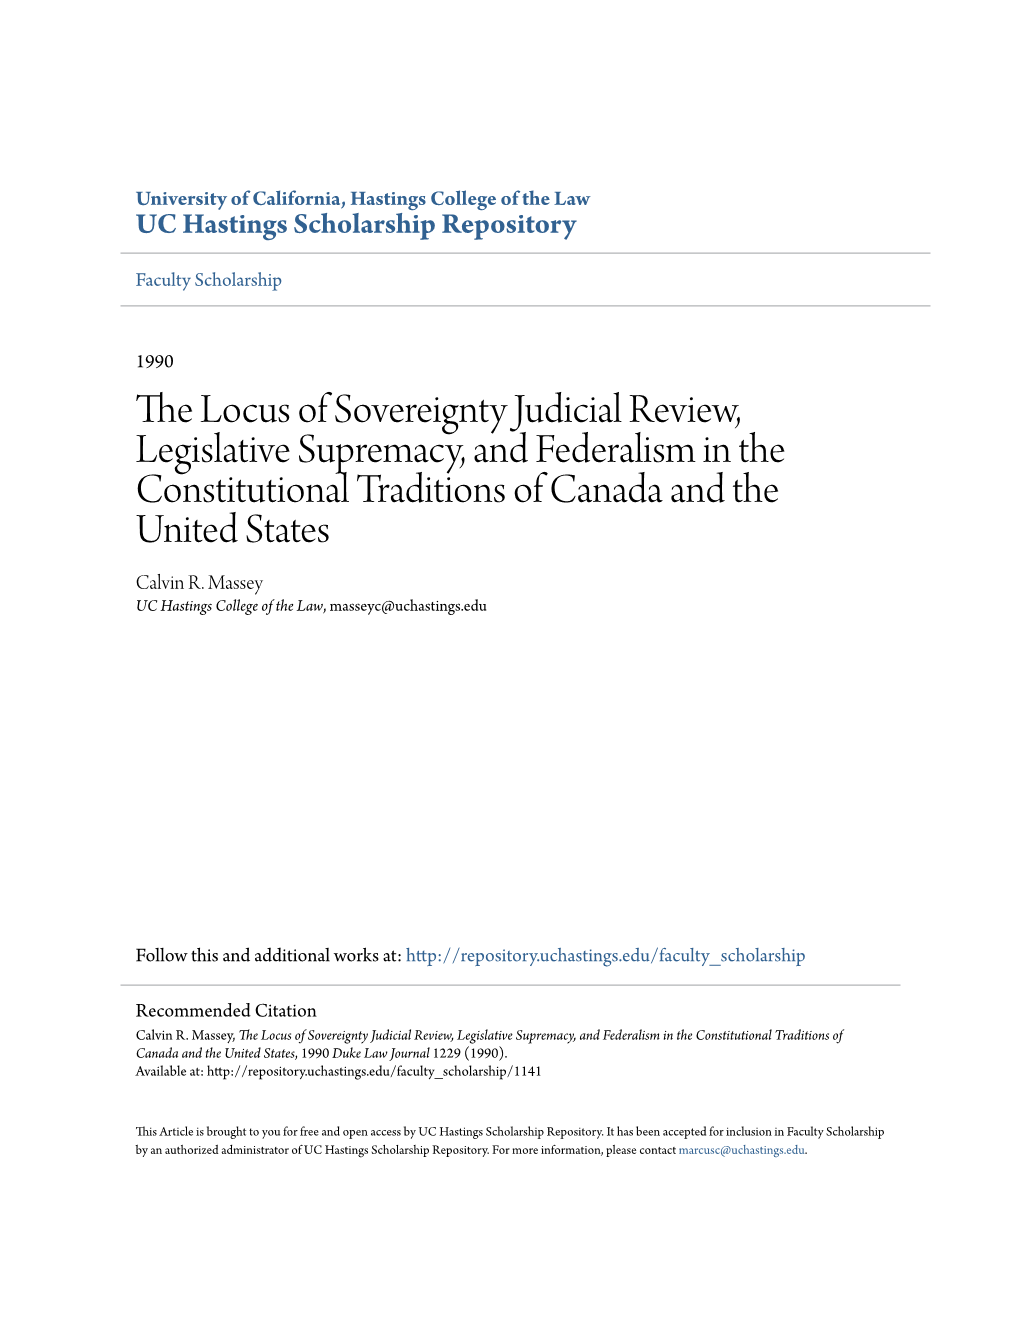 The Locus of Sovereignty Judicial Review, Legislative Supremacy, and Federalism in the Constitutional Traditions of Canada and the United States Calvin R